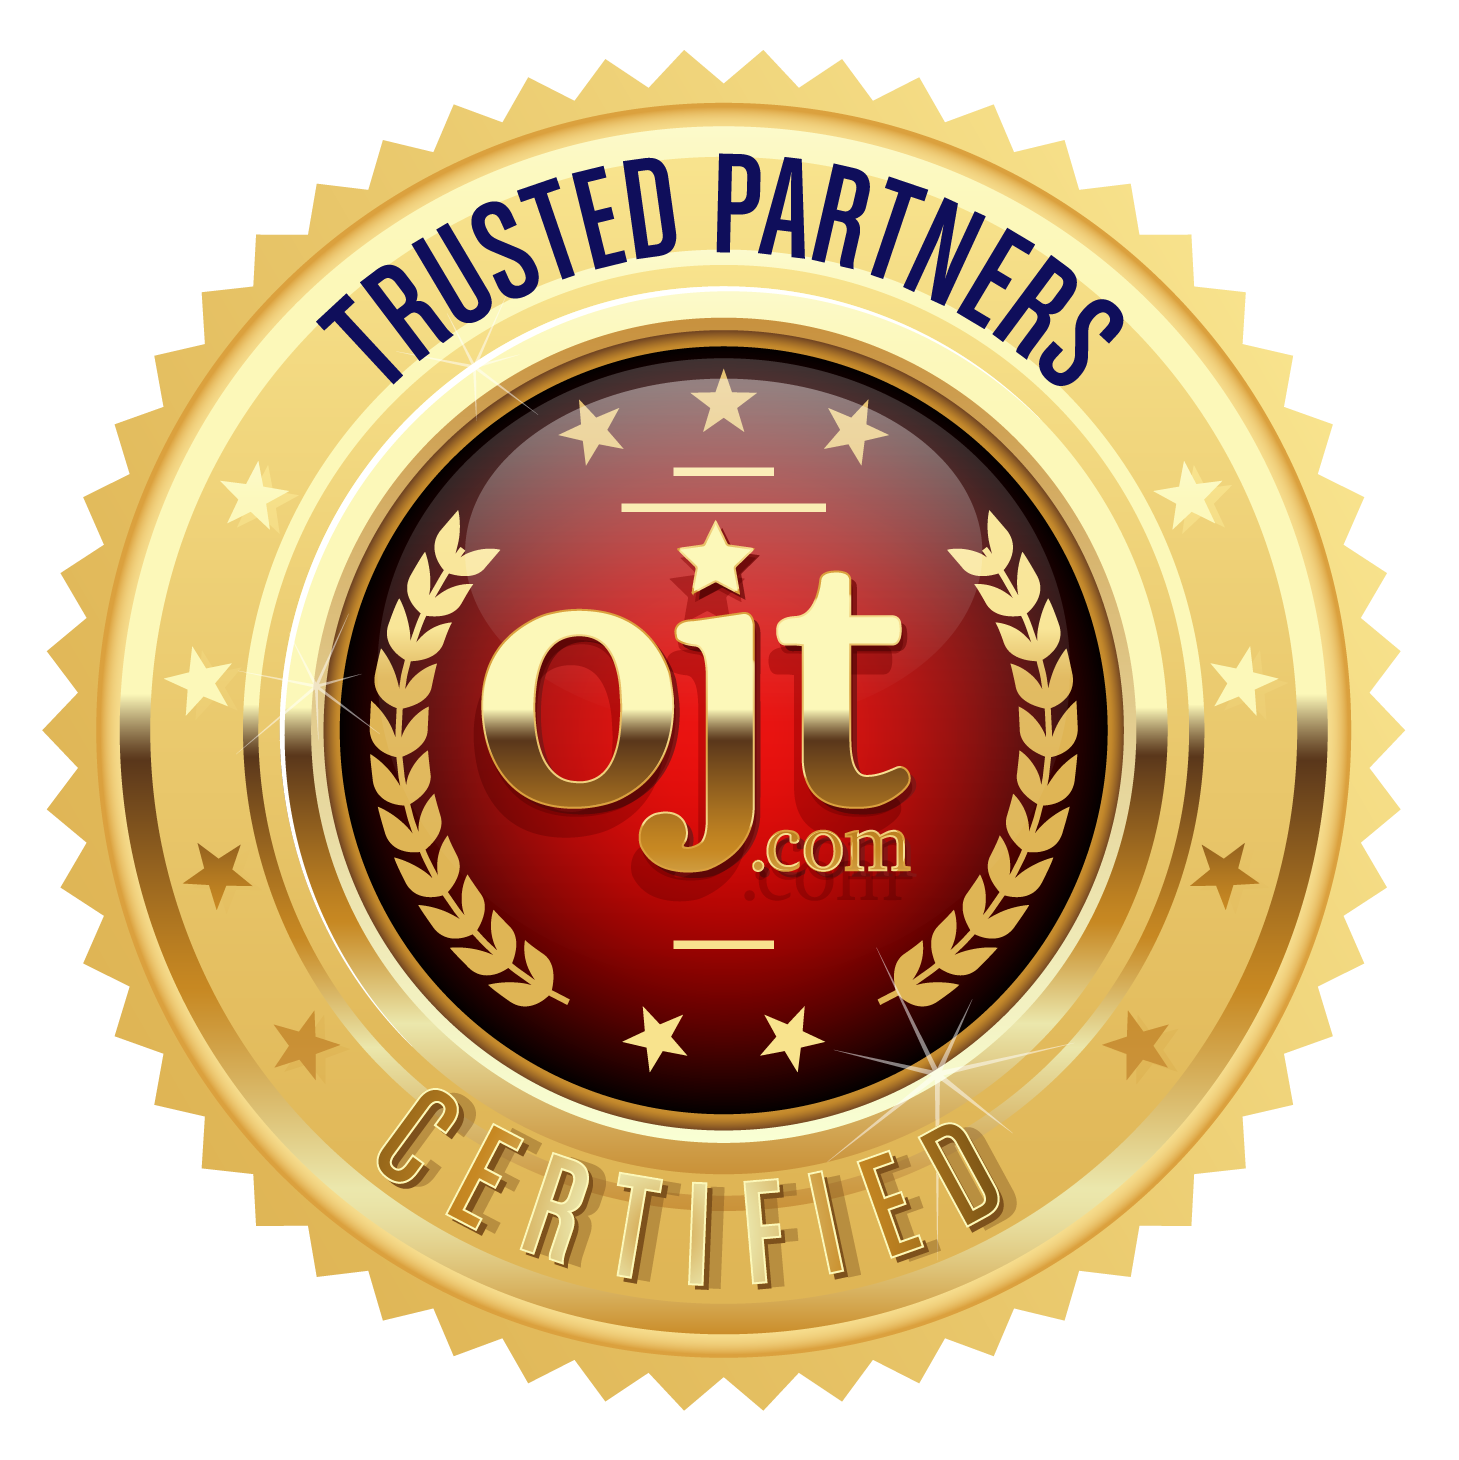 Gold Trusted Partner Seal